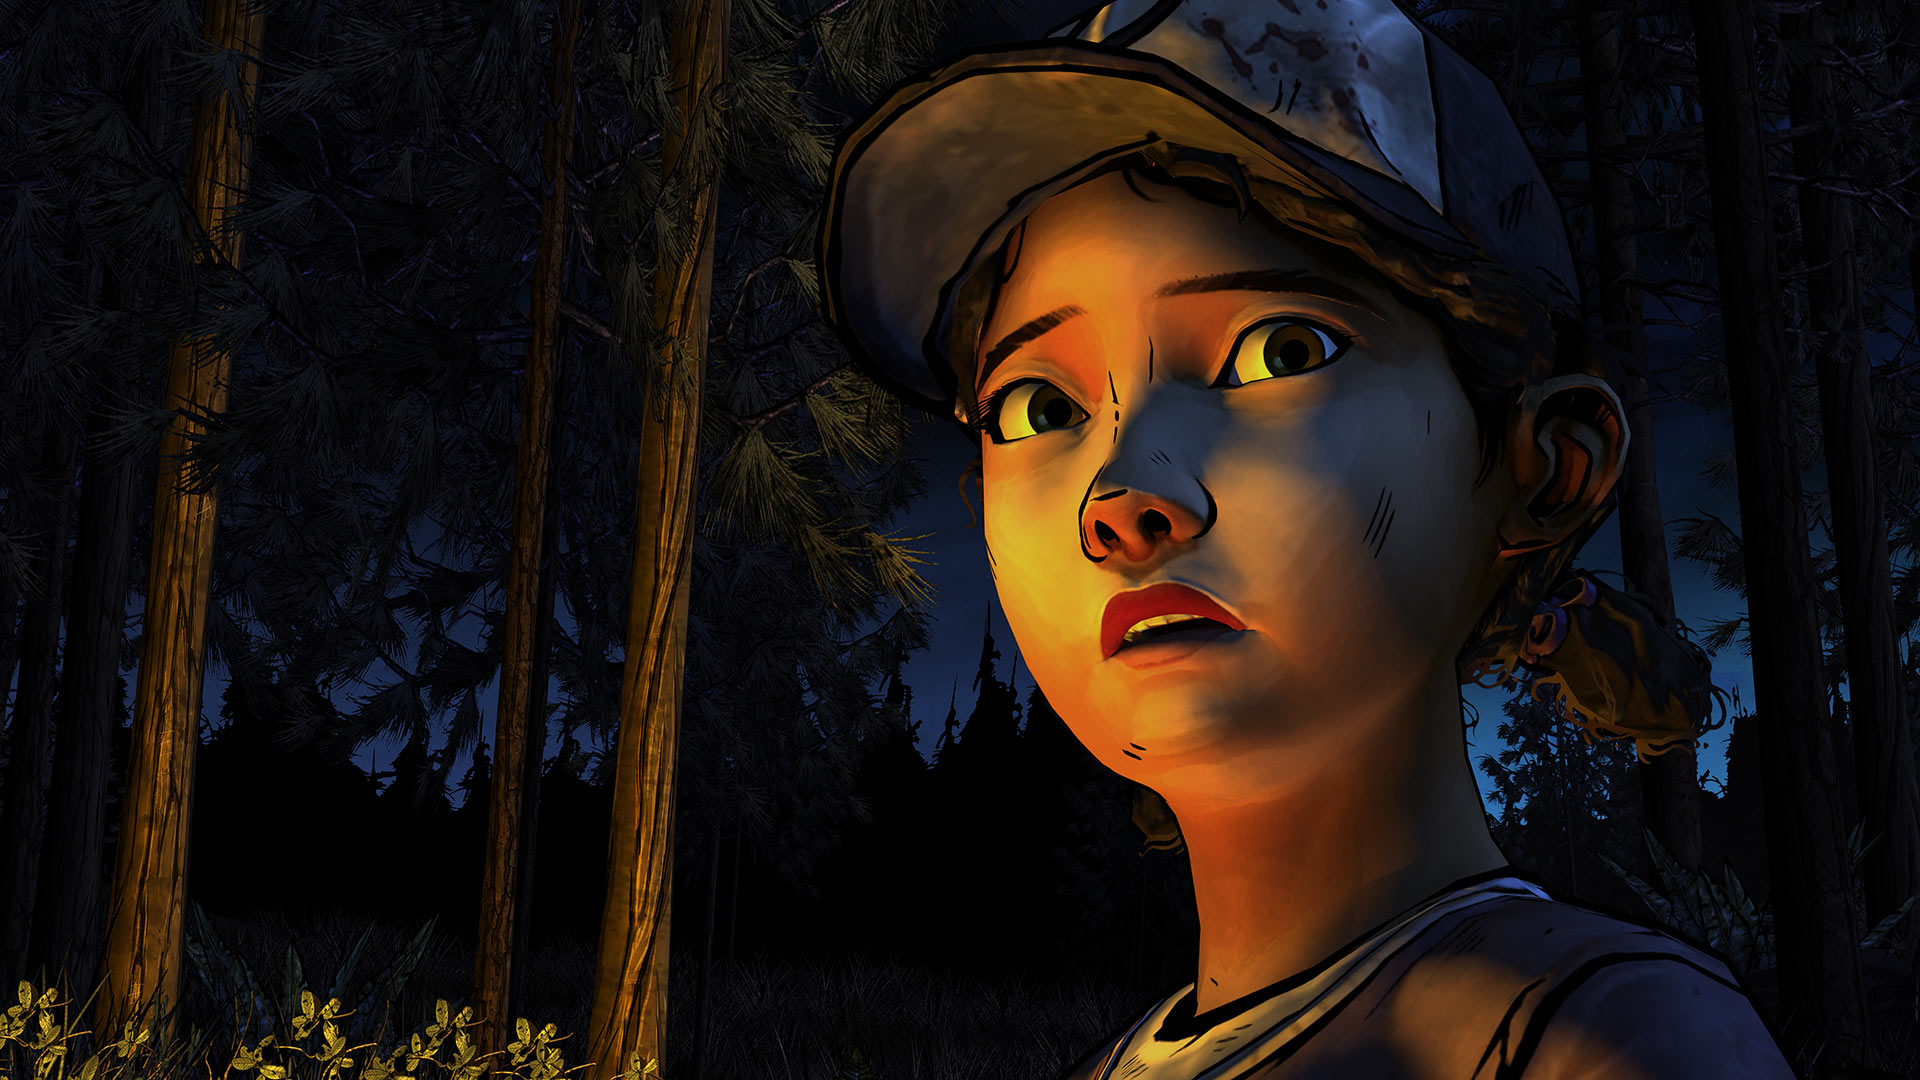 Clementine from "The Walking Dead:" a young girl in a baseball hat, looking scared in a dark forest